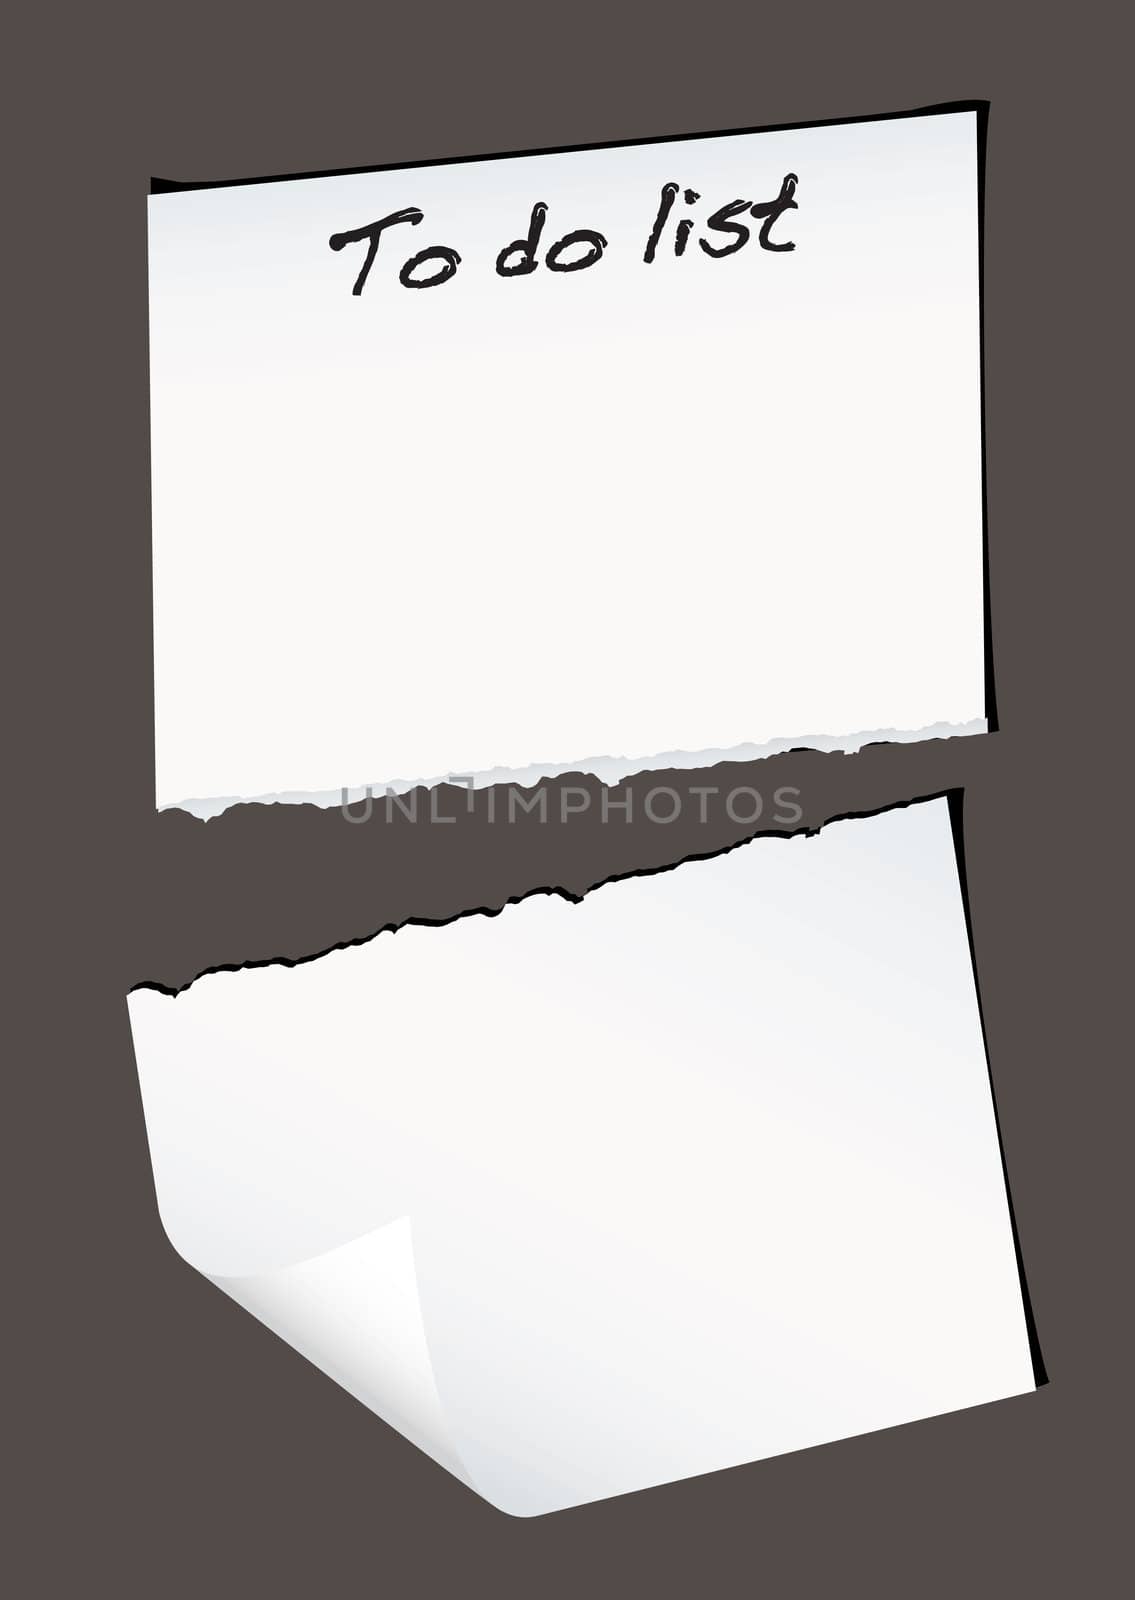 Single piece of white paper torn in half with to do list